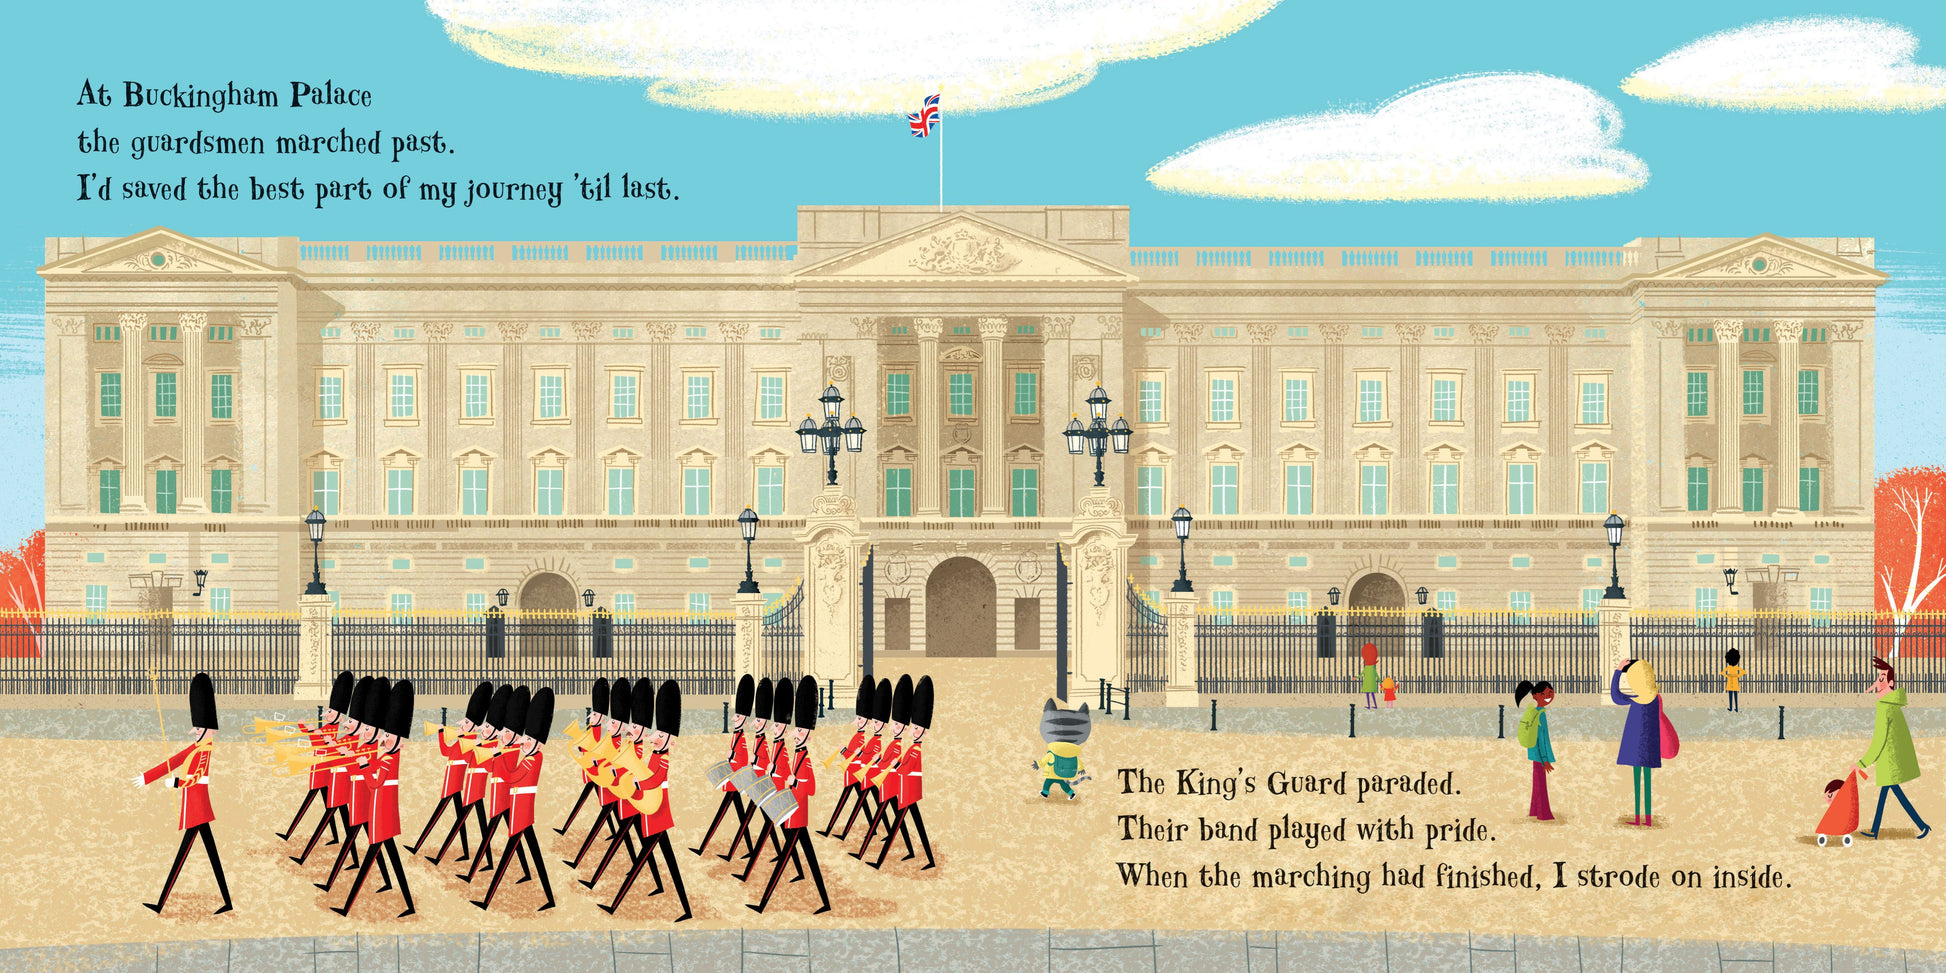 charming version of the classic nursery rhyme, updated to give Pussycat a full tour of London before he calls on the King. He visits famous sights including the Tower of London, Shakespeare’s Globe, St Paul’s Cathedral, and Nelson’s Column, and enjoys the view from the top of the Shard and a ride on the London Eye. With beautiful illustrations, this picture book makes a lovely gift or souvenir of a trip to London.